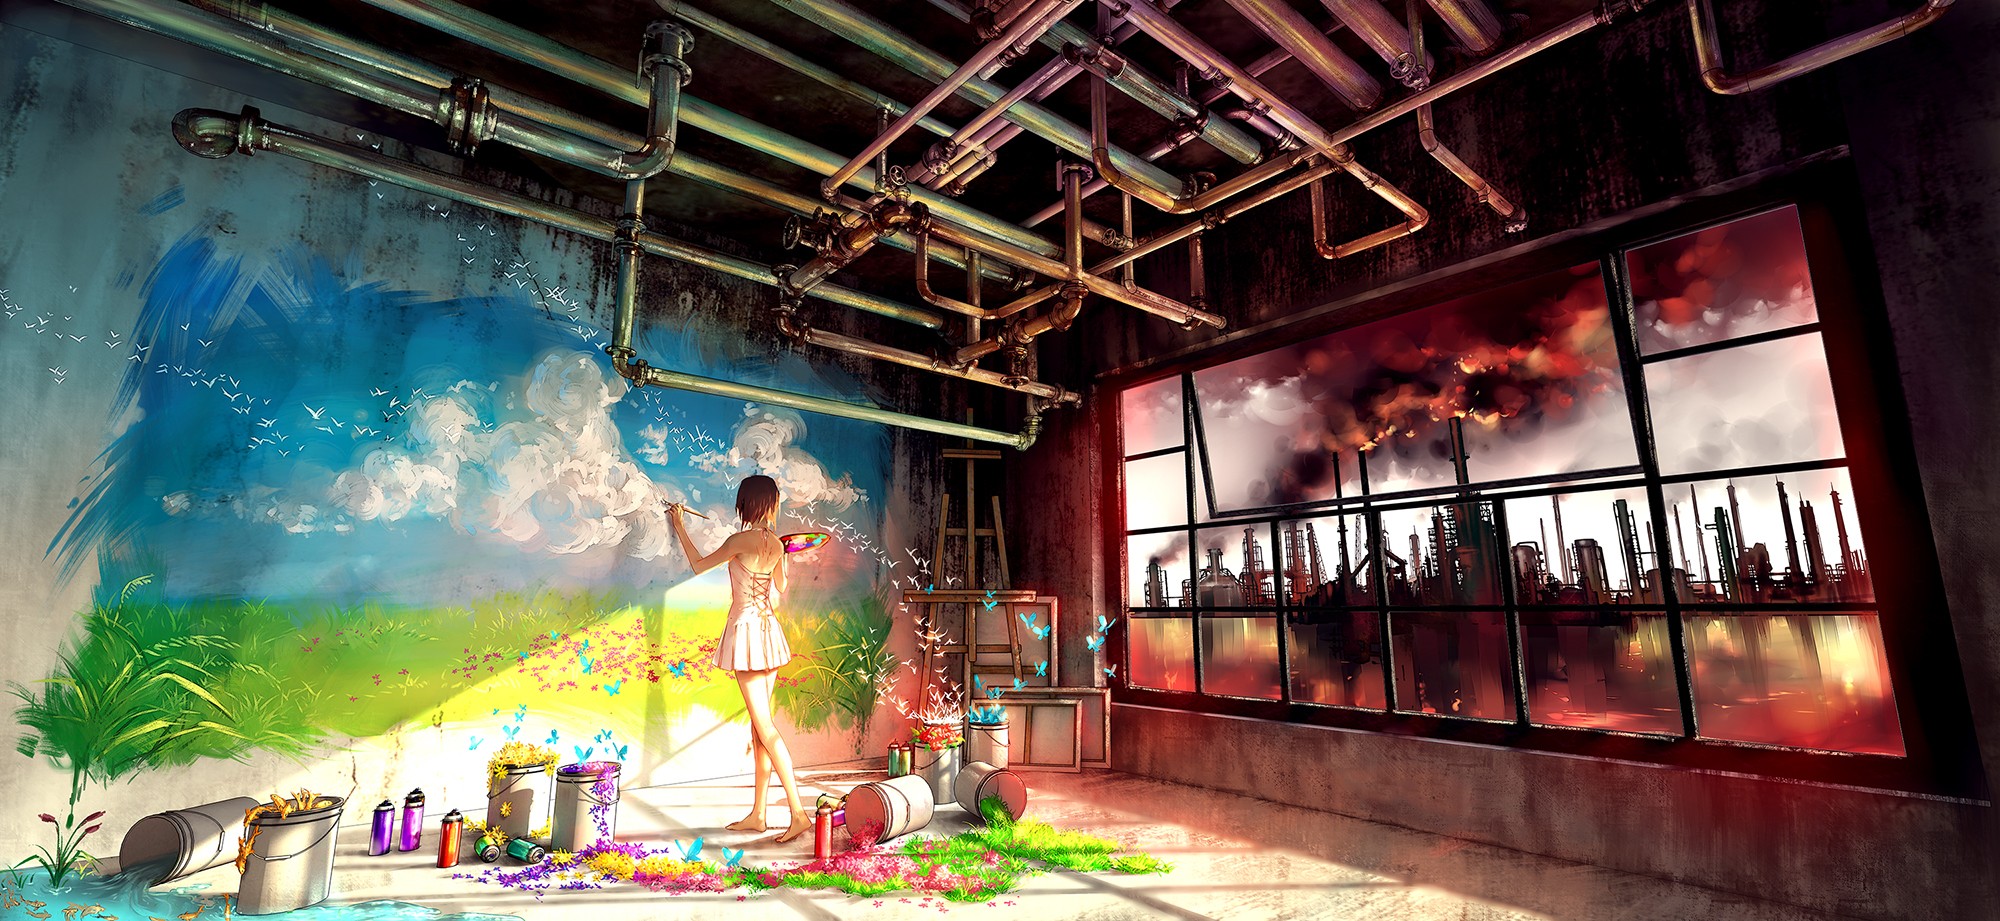 Yuumei, Contrast, Colorful, Painting Wallpaper